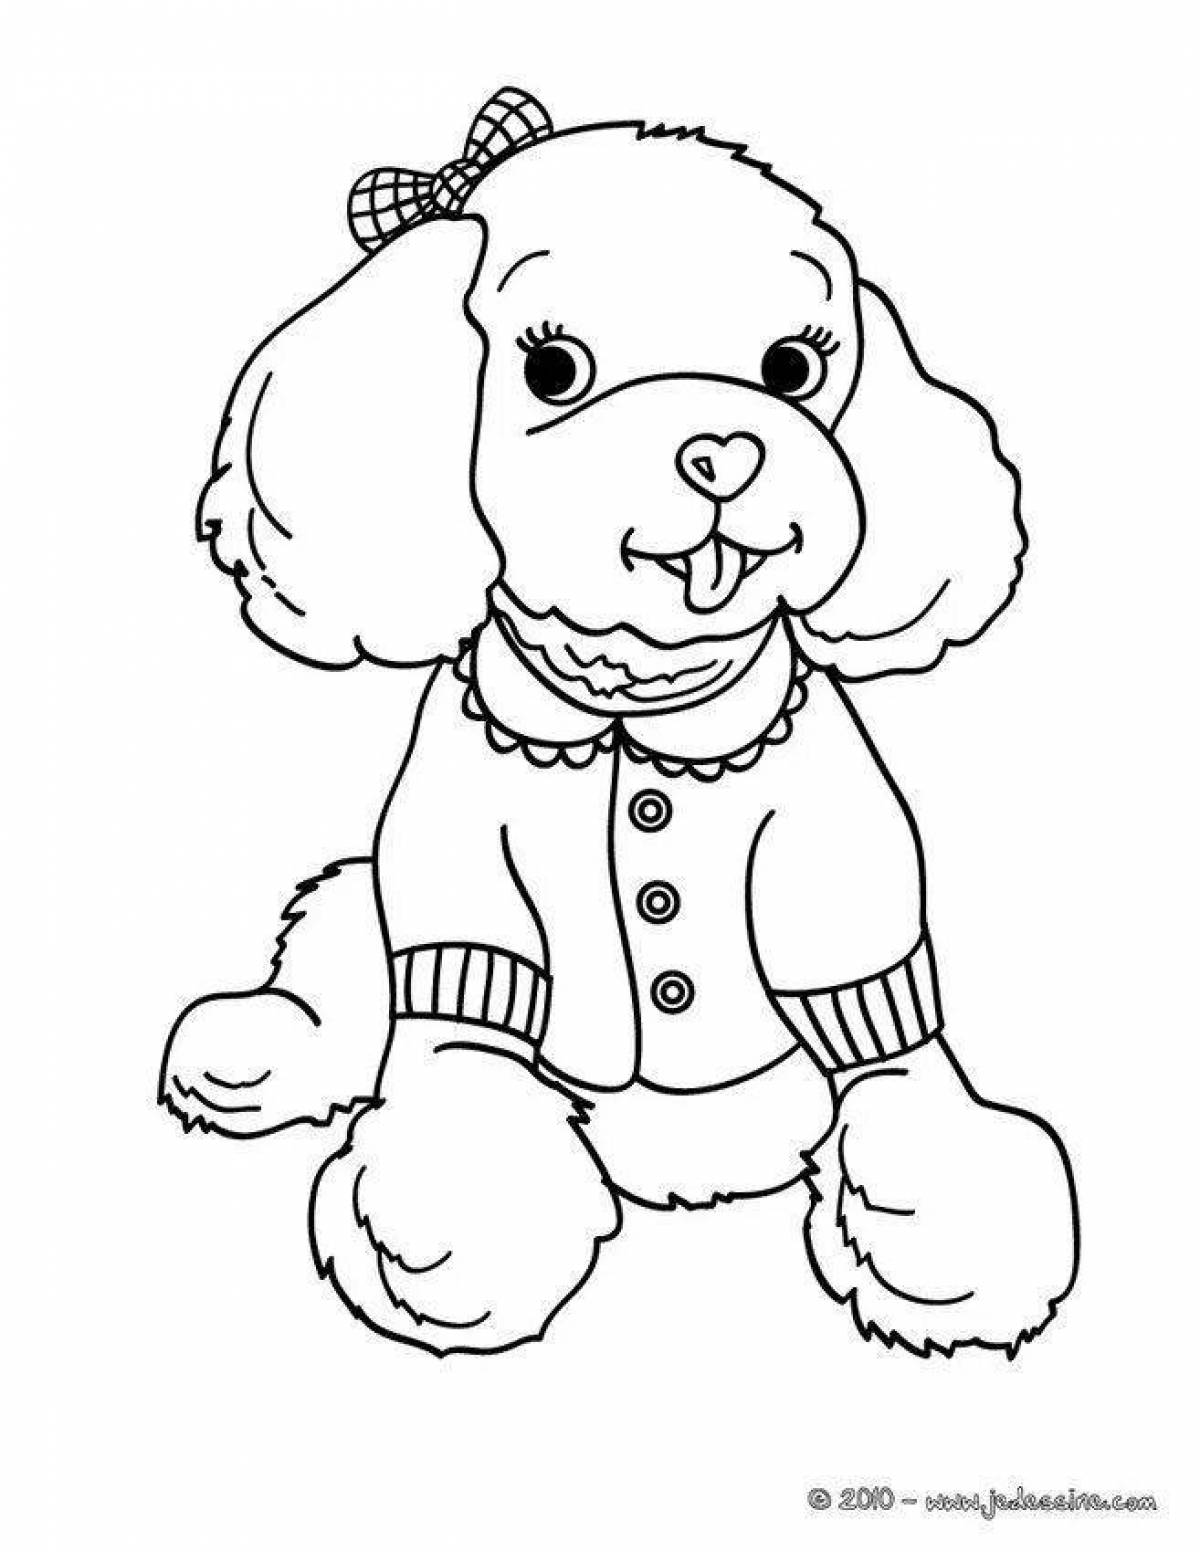 Fancy coloring dog with clothes